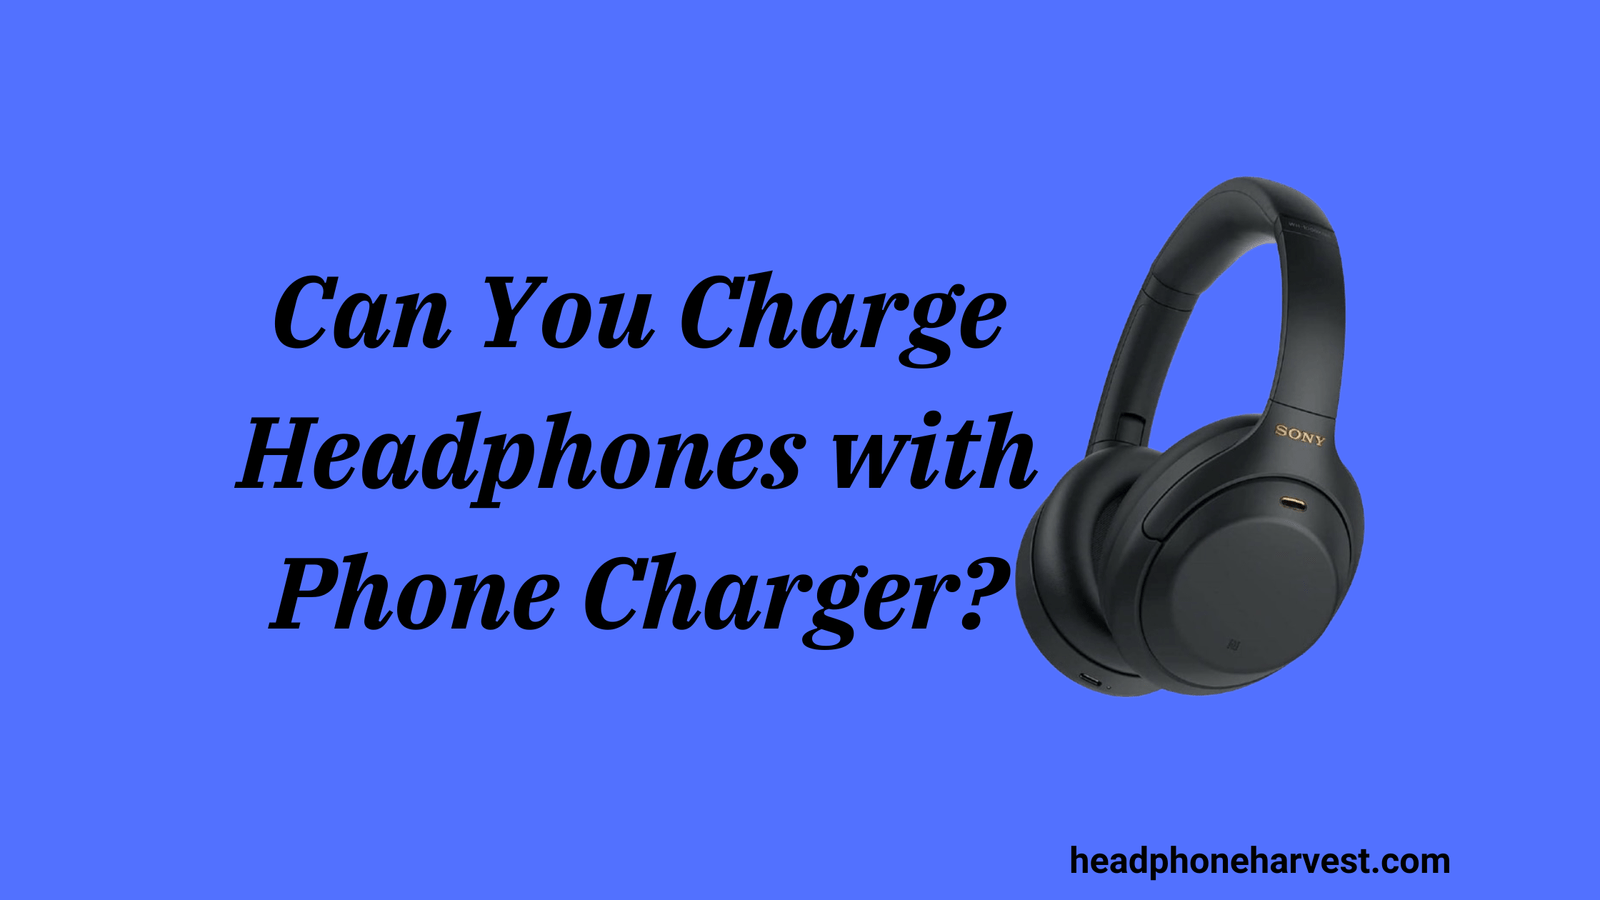 Can You Charge Headphones with Phone Charger?